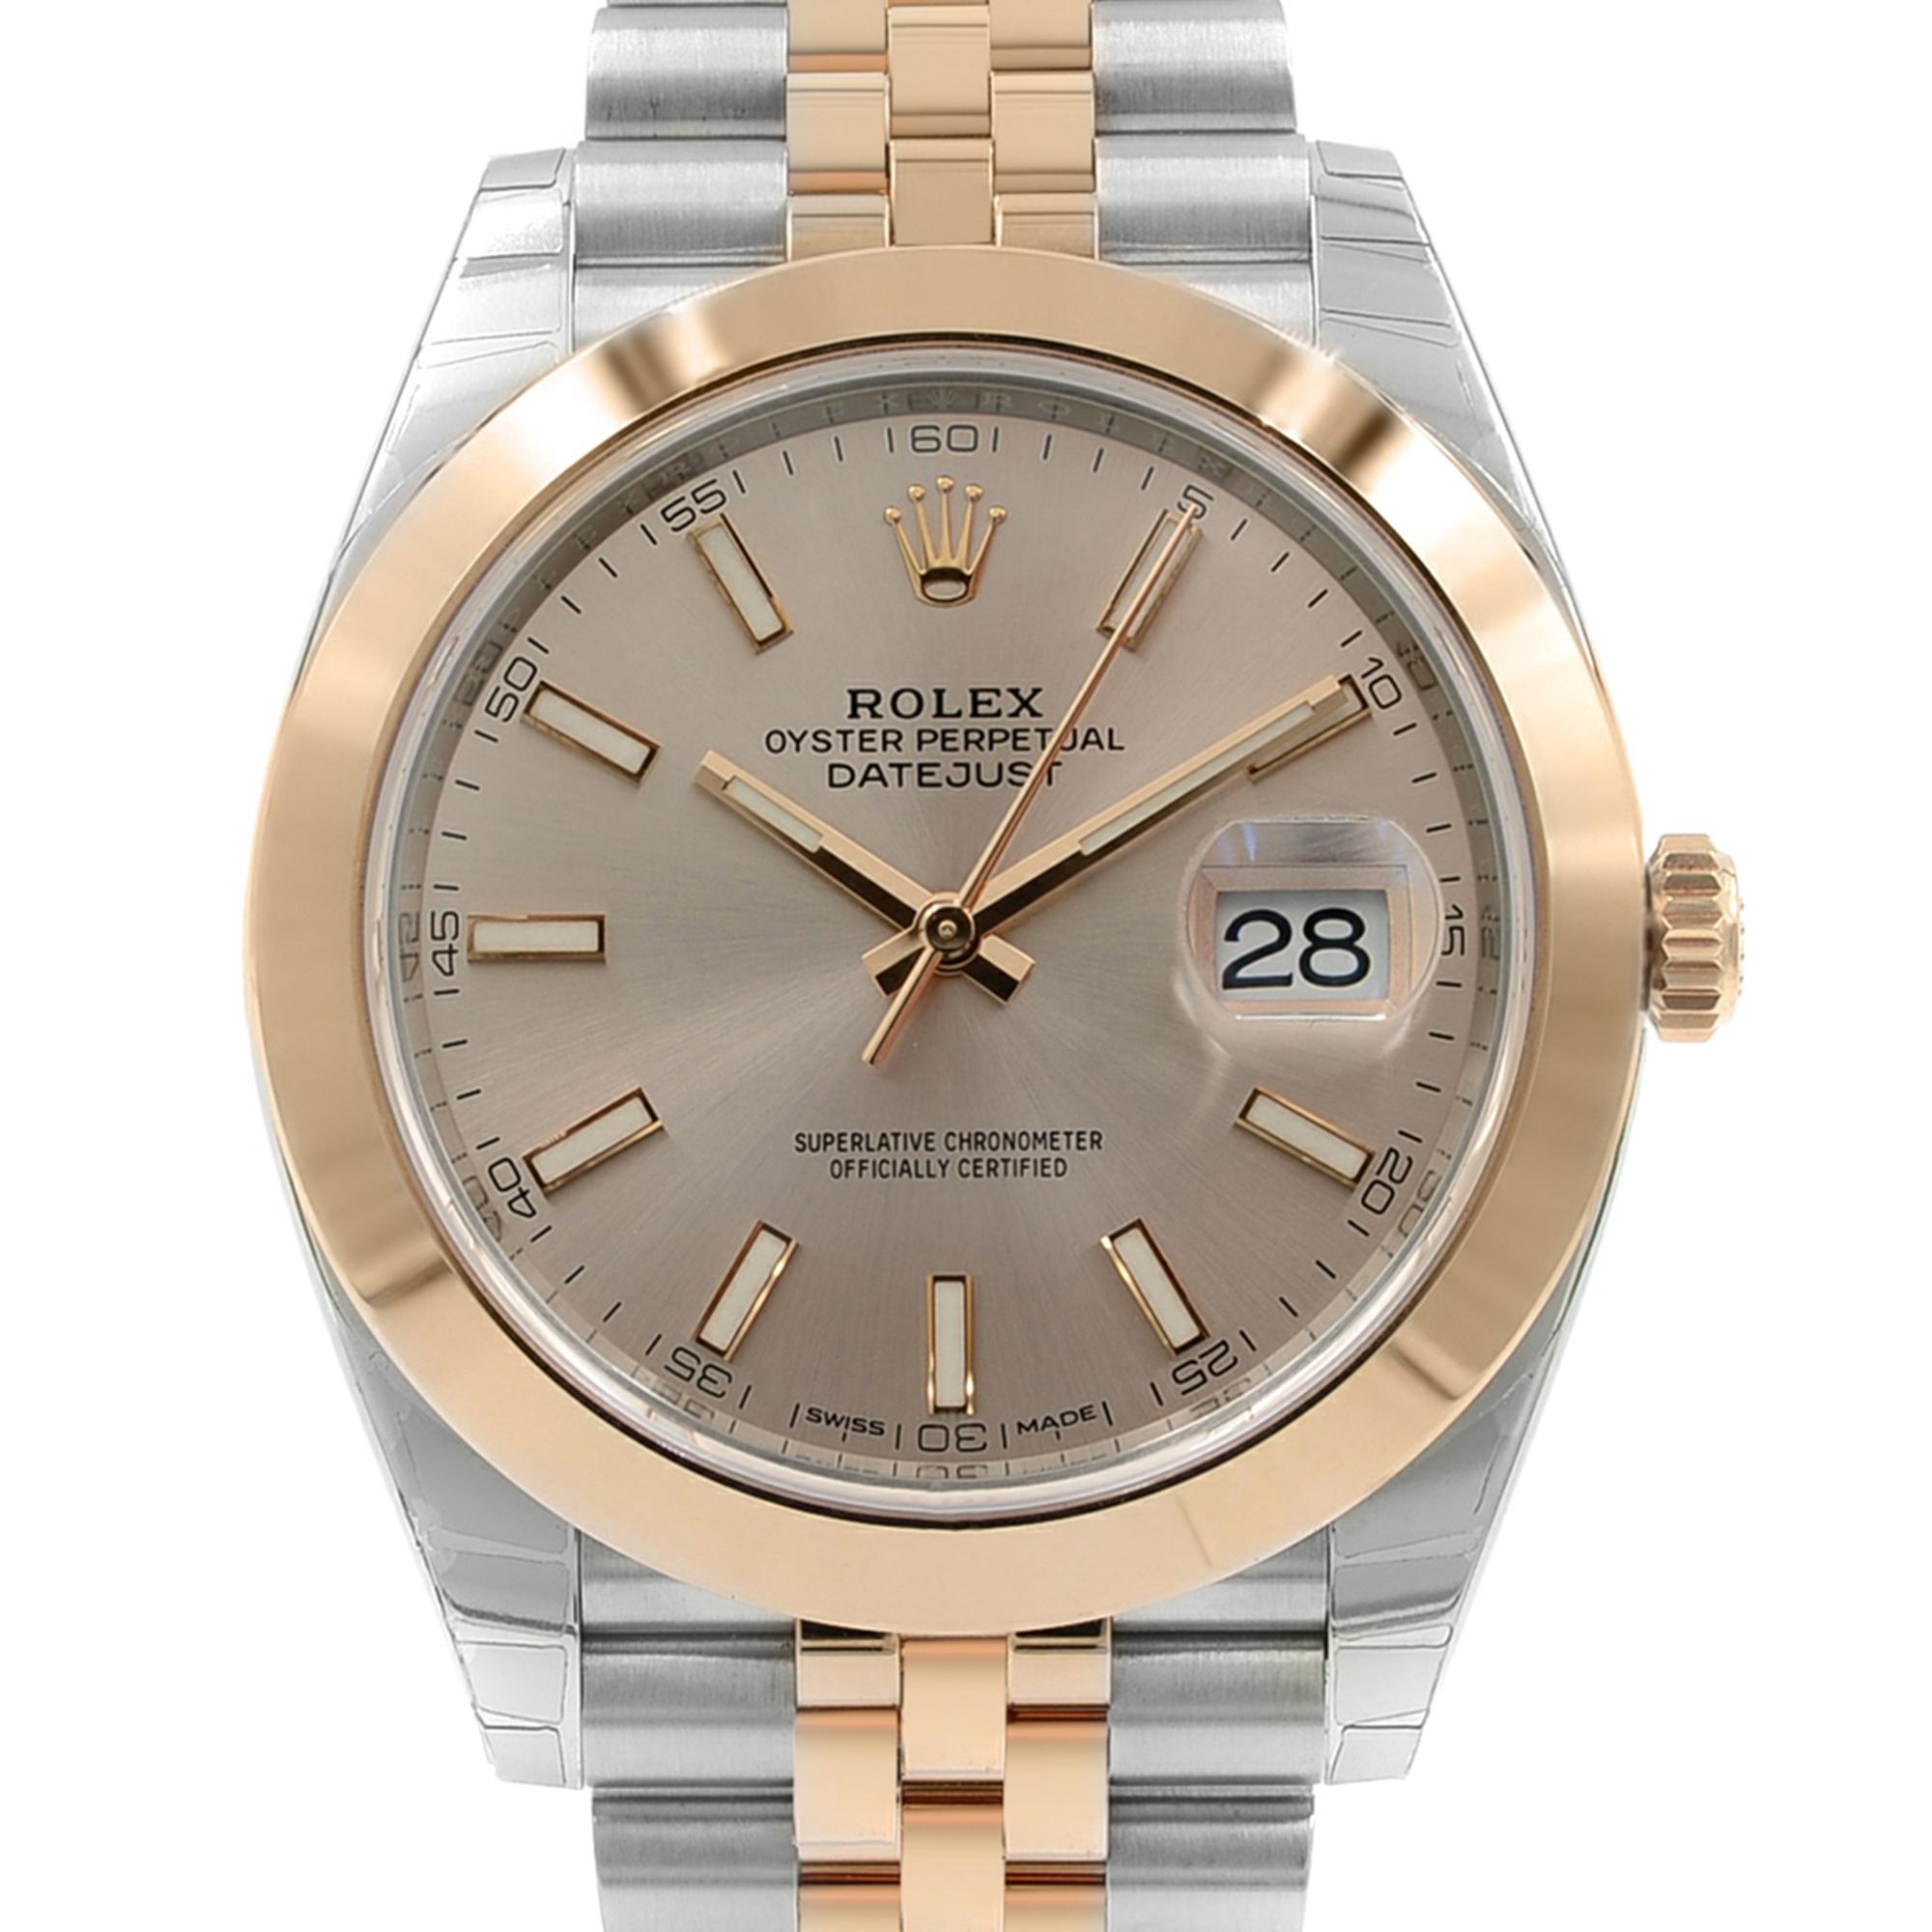 This never been worn Rolex Datejust 41 126301 suij is a beautiful men's timepiece that is powered by an automatic movement which is cased in a stainless steel case. It has a round shape face, date dial and has hand sticks style markers. It is